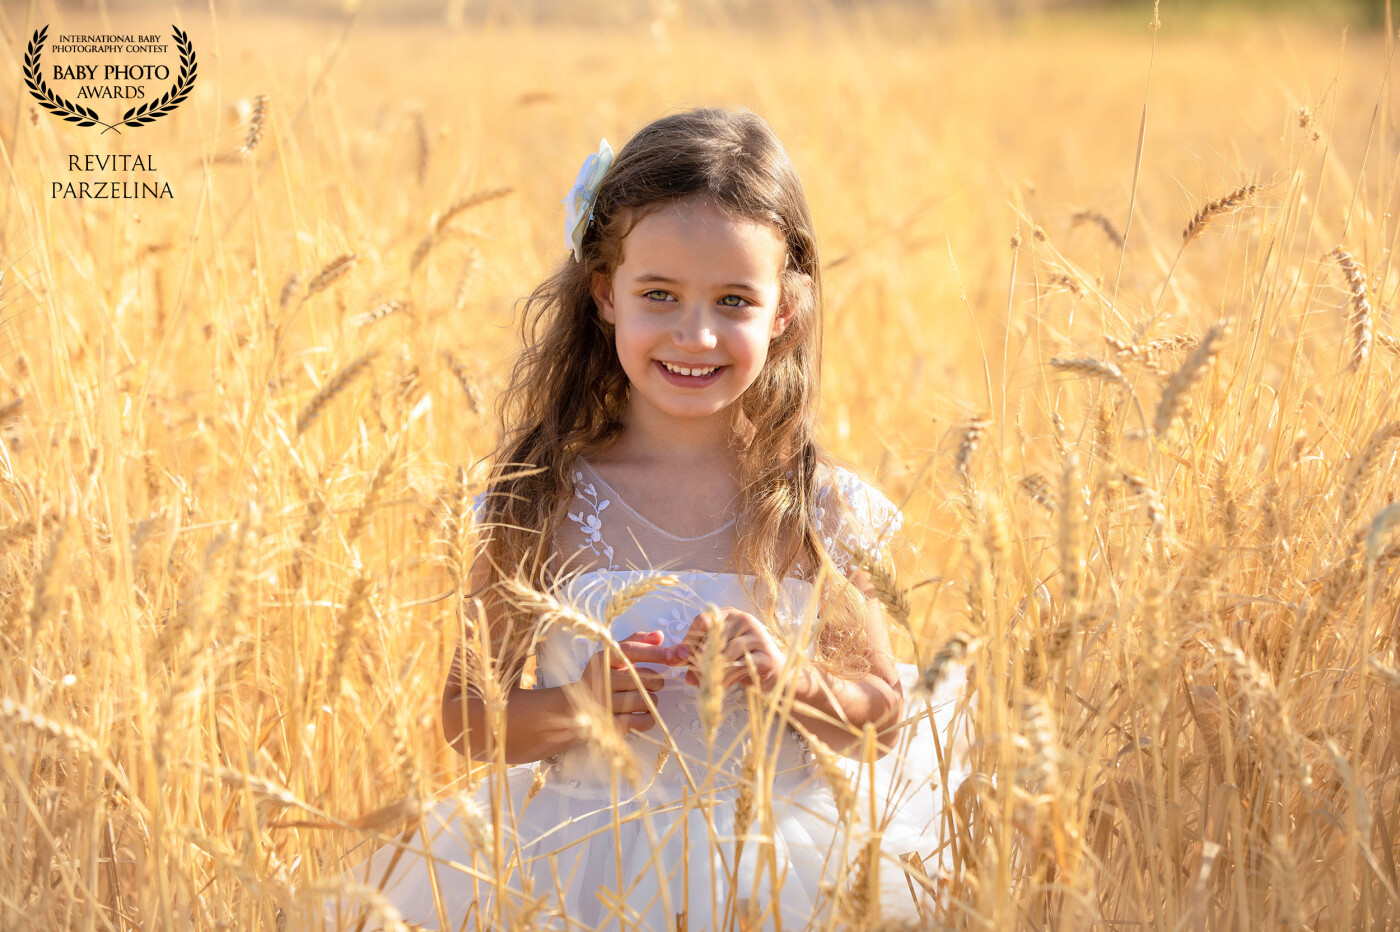 The photo of Yuval in the wheat field is a beautiful sight to behold. It captures the essence of nature and the simple joys it brings.